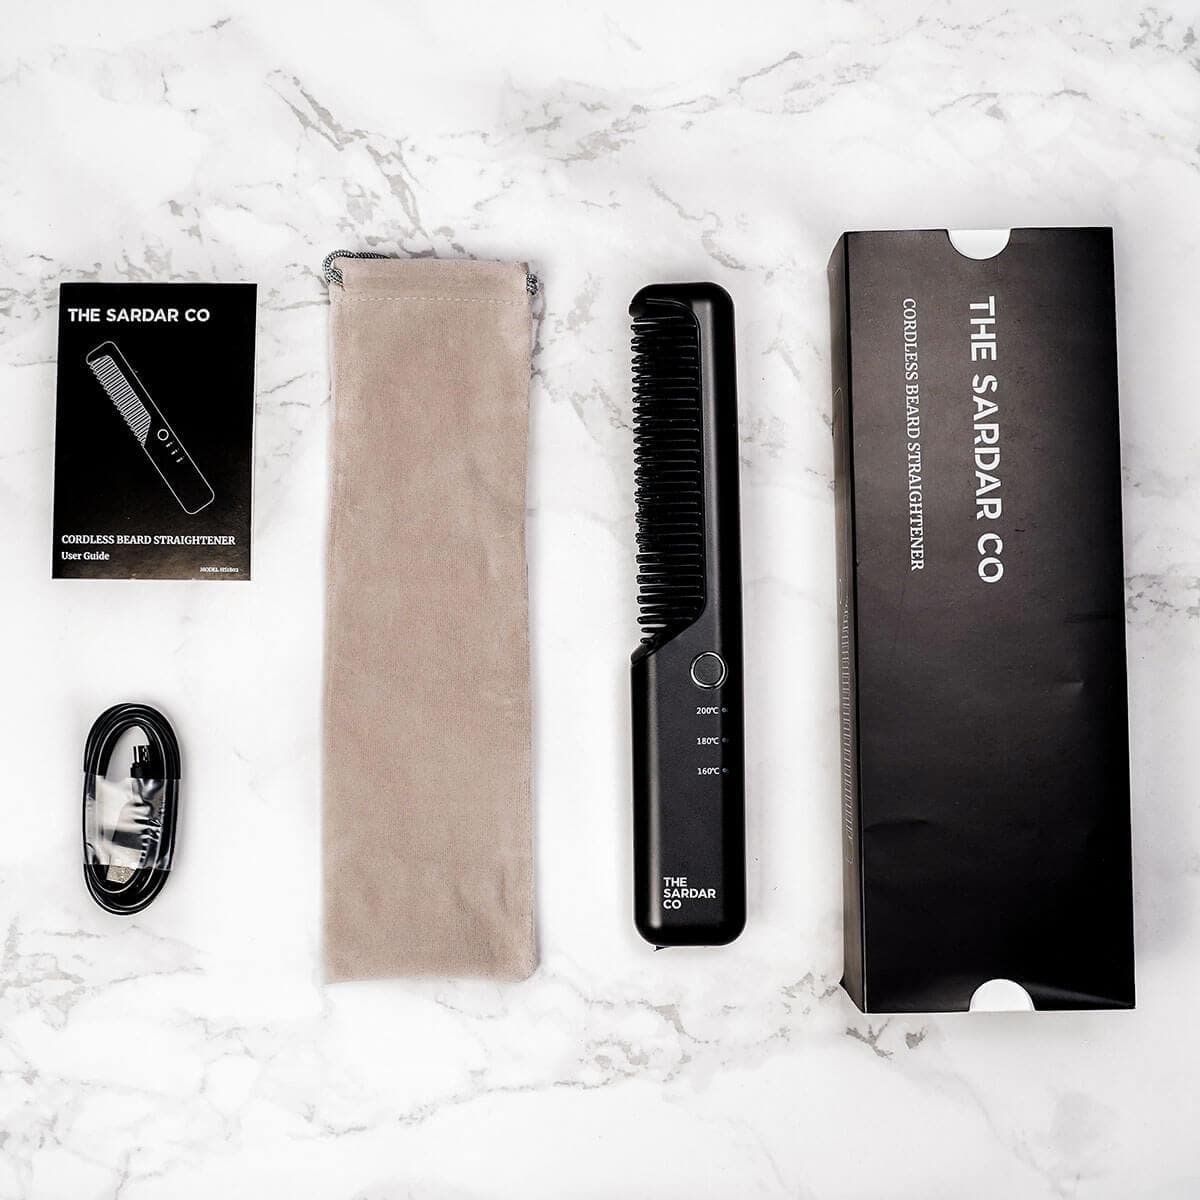 contents that are included with the beard straightener